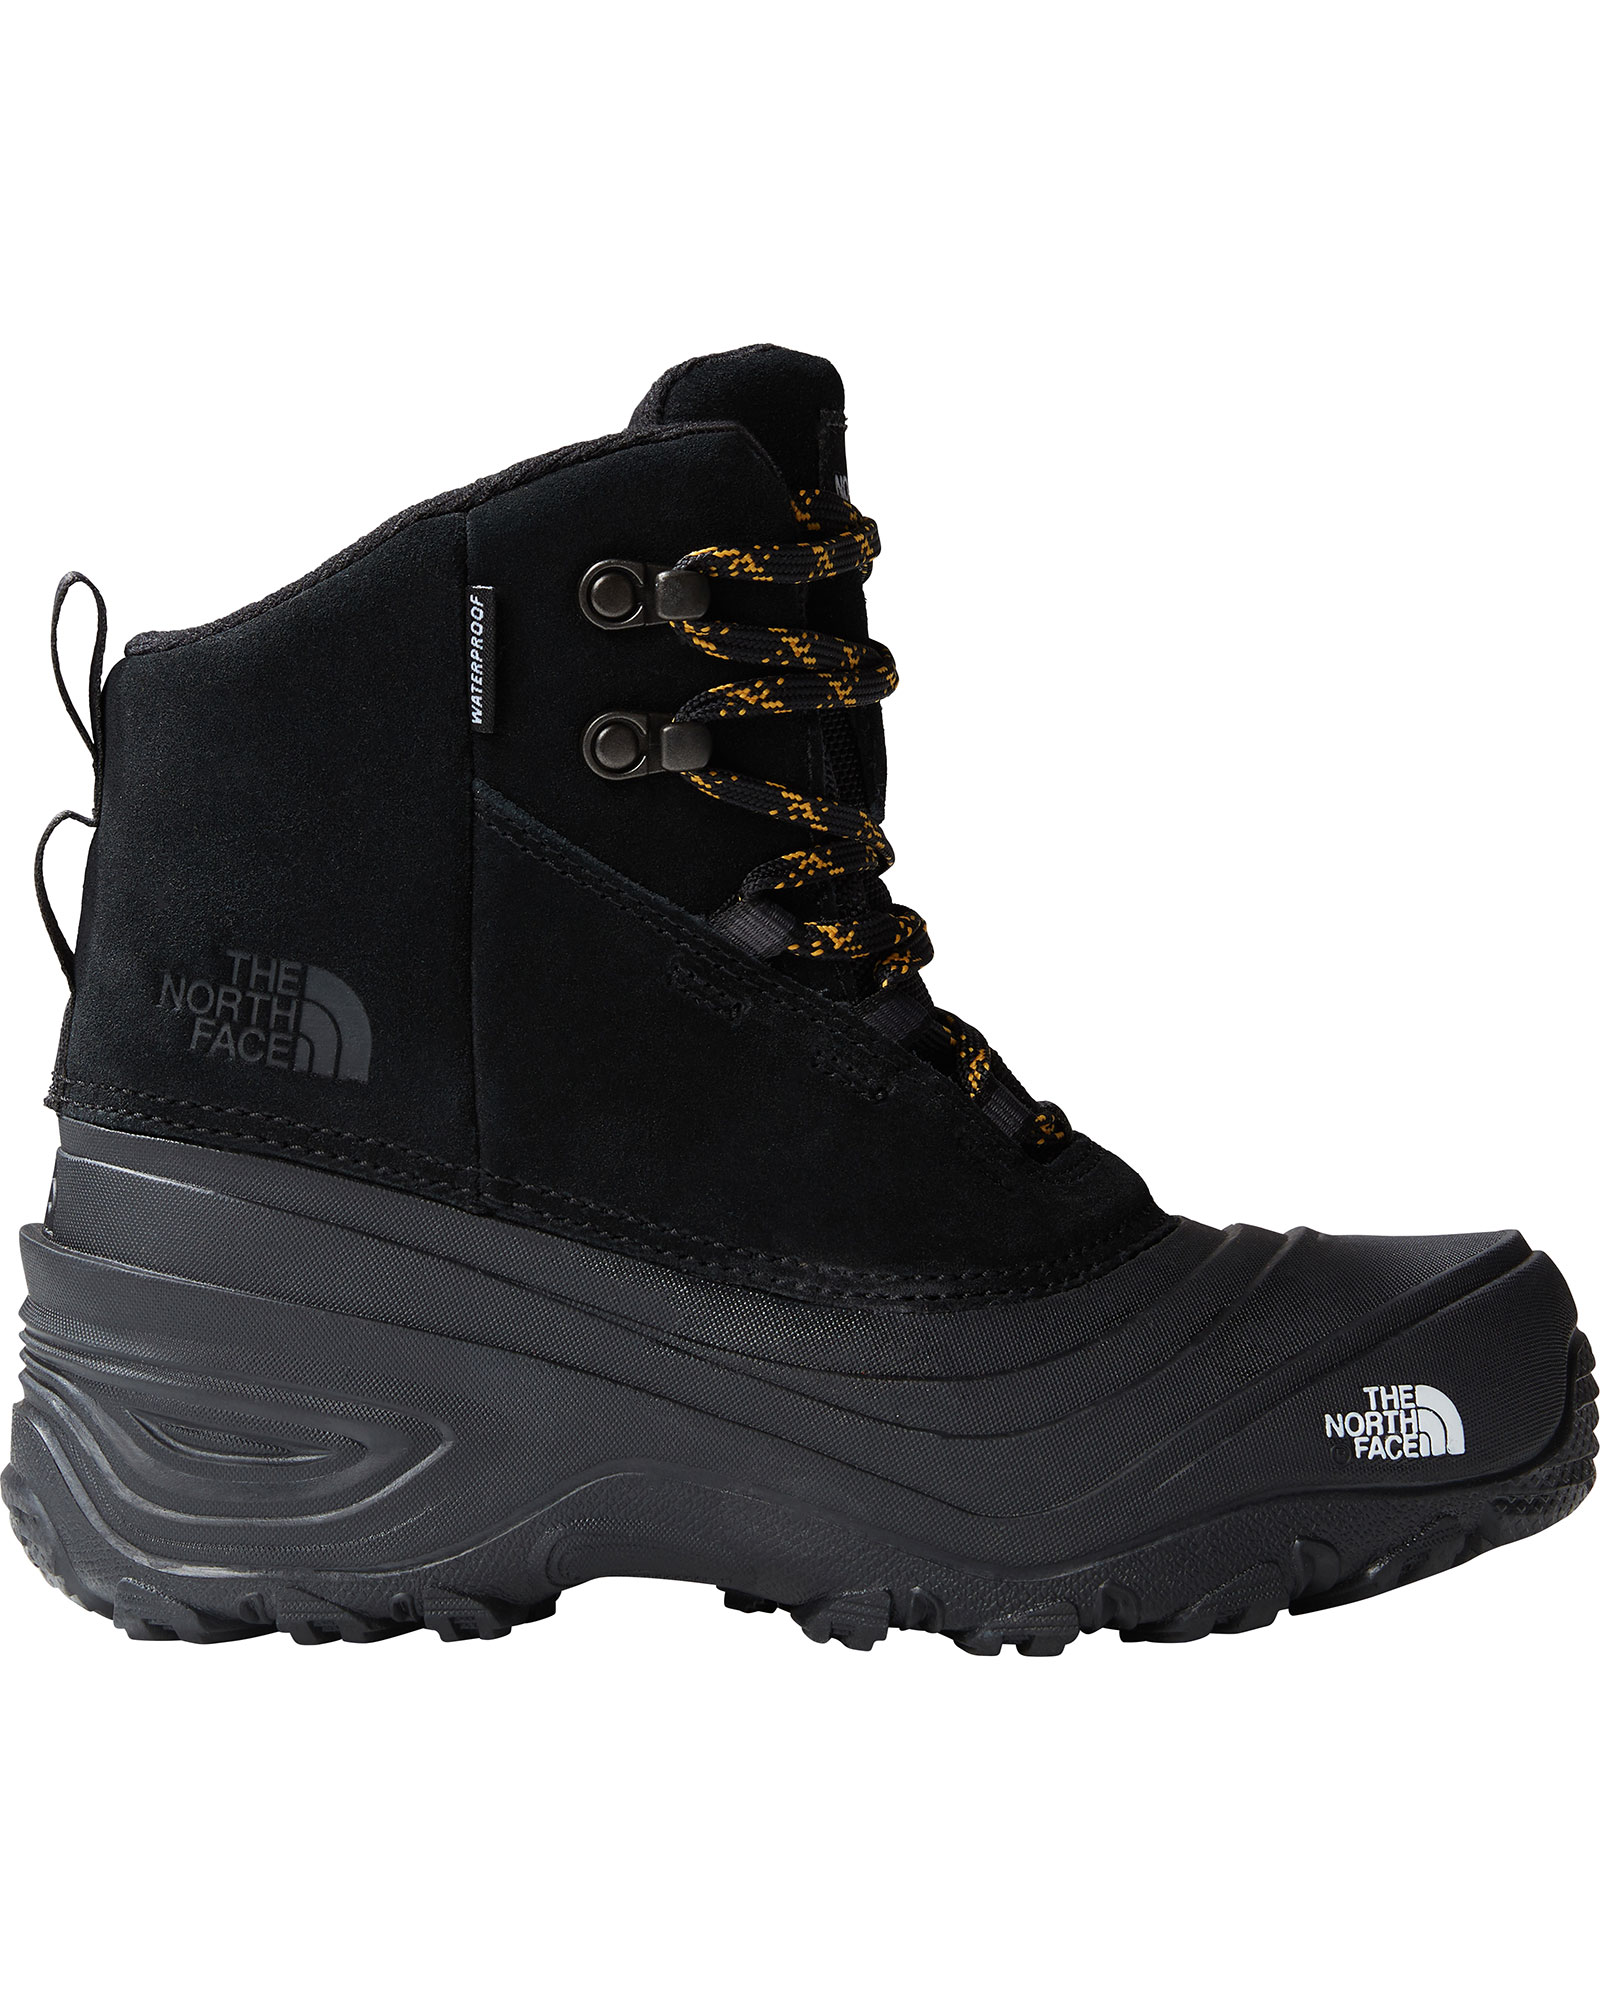 The North Face Youth Chilkat V Lace Waterproof Kid’s Boots - TNF Black/TNF Black UK 4